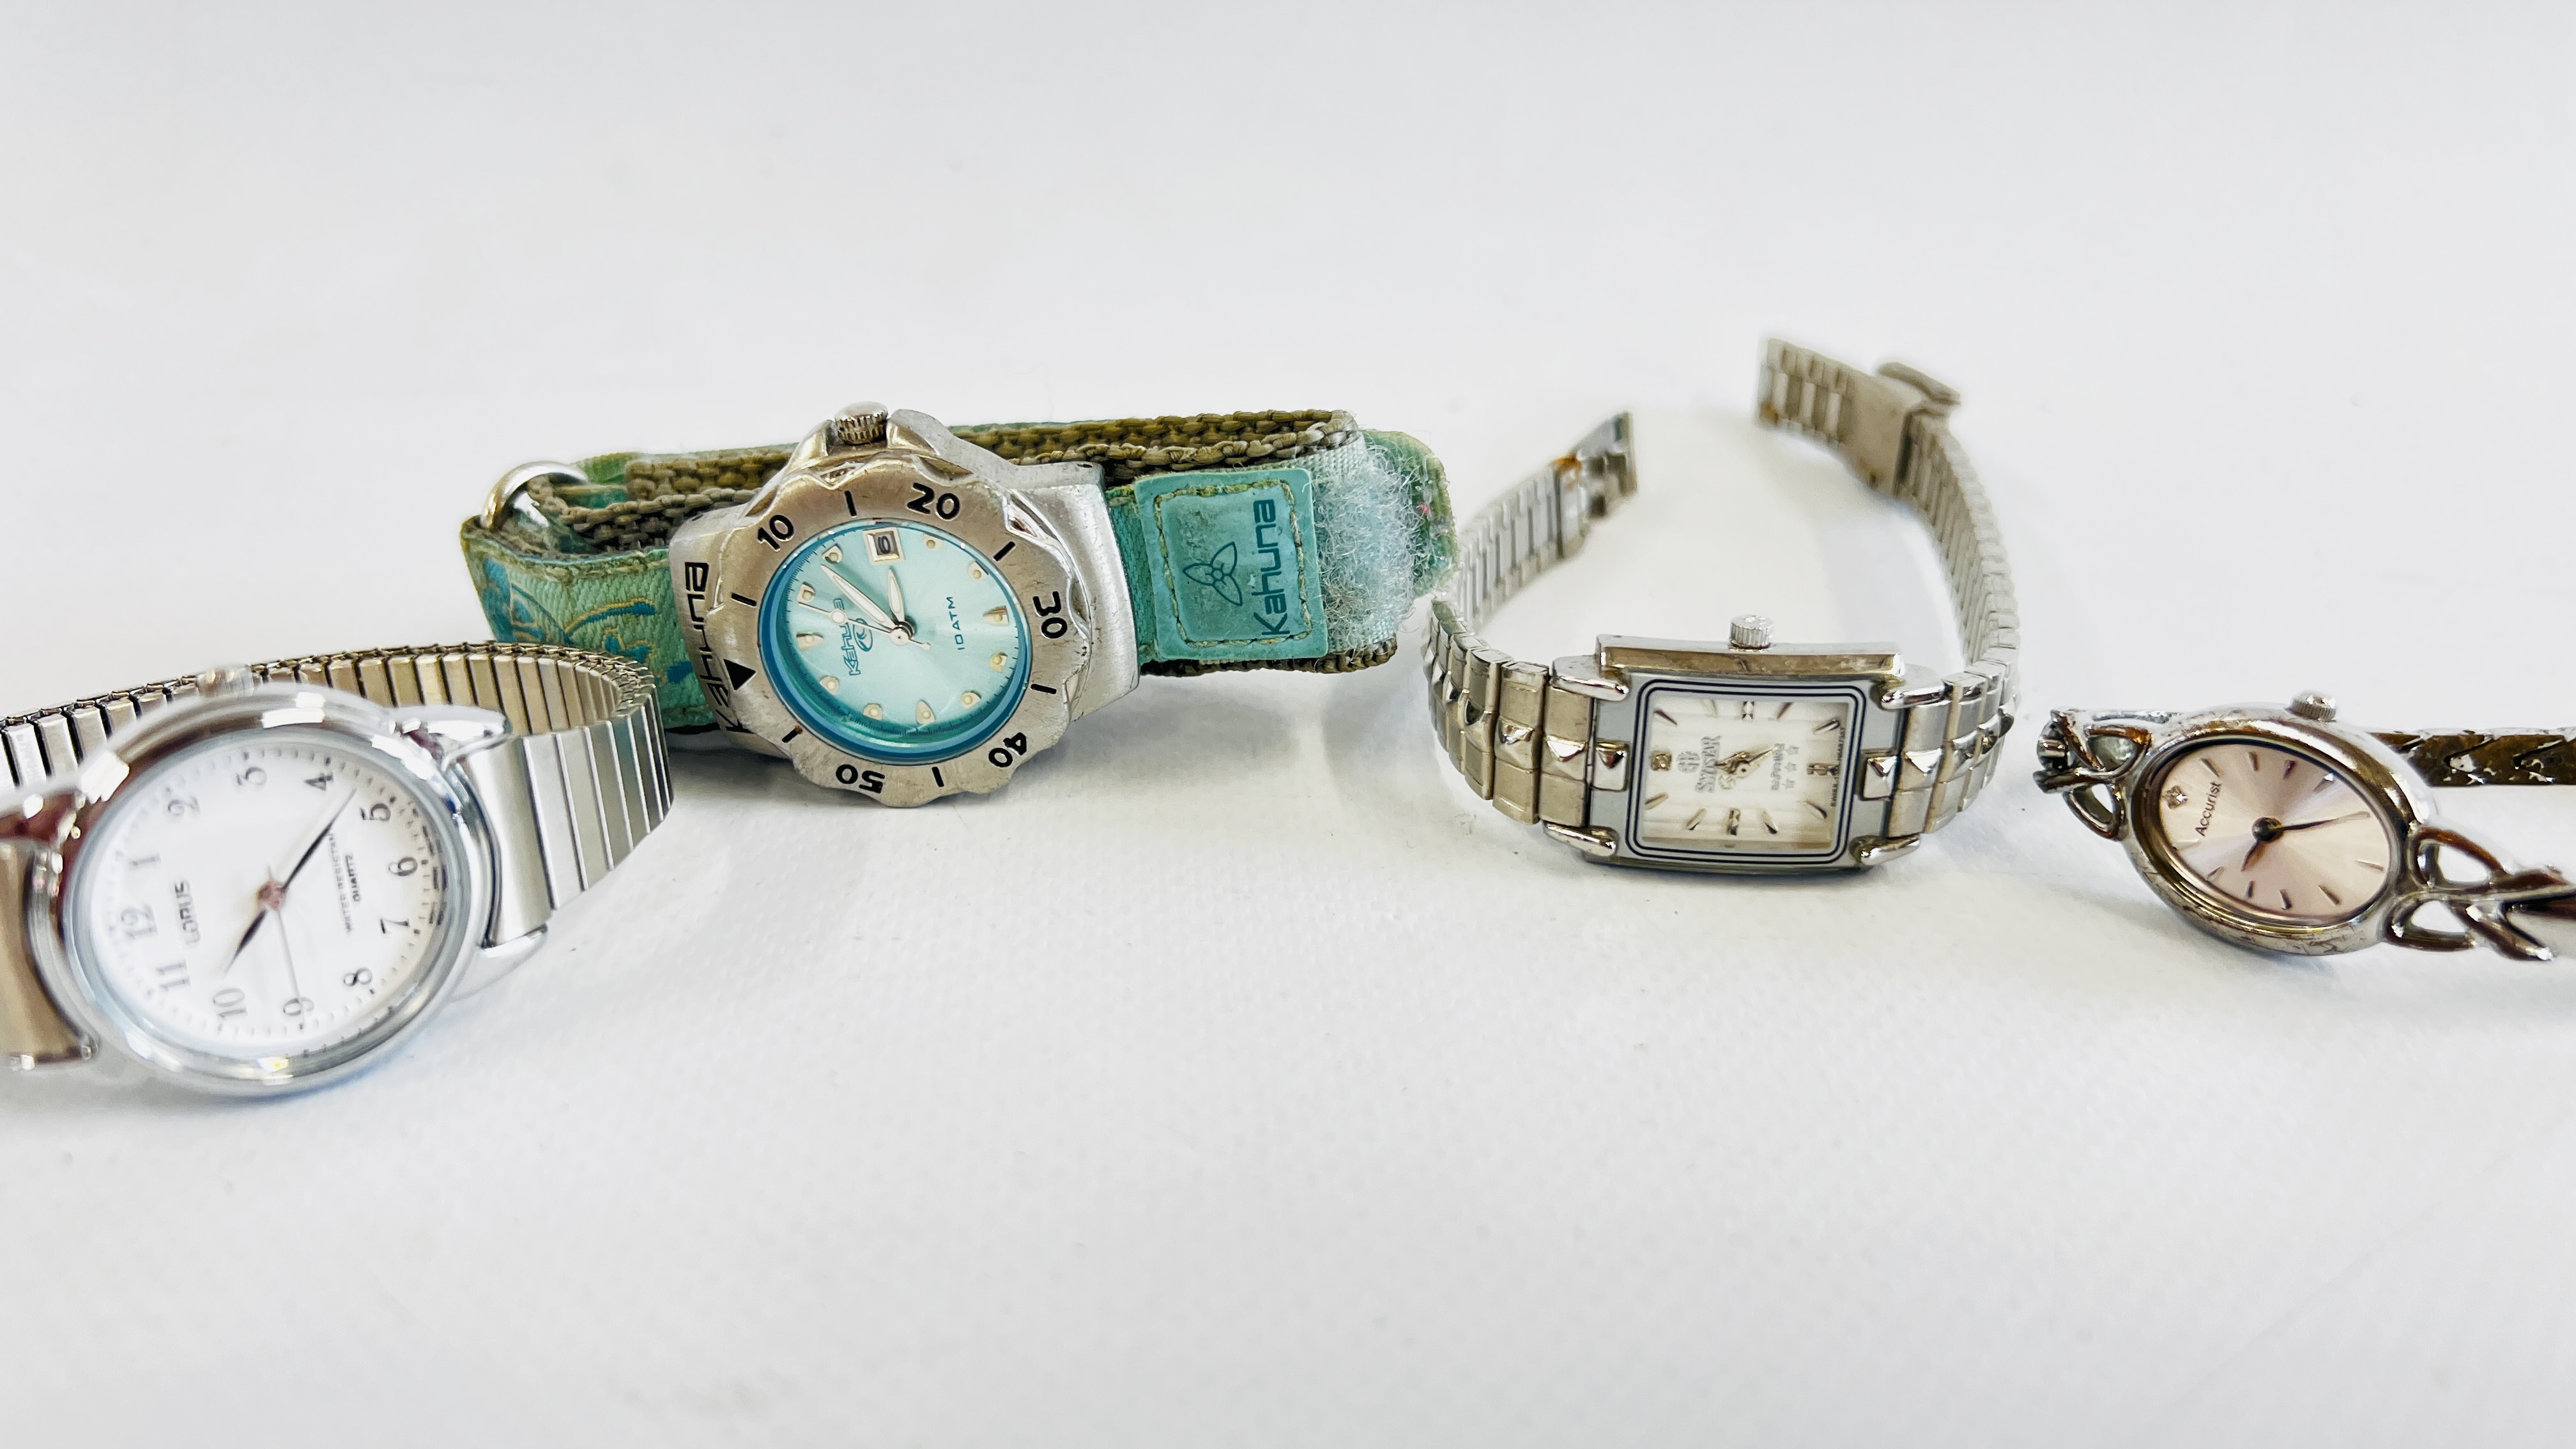 25 ASSORTED LADIES WRIST WATCHES TO INCLUDE LORUS, TERNER, SEQUEL, KANANA, FASHION DESIGNER ETC. - Image 6 of 6